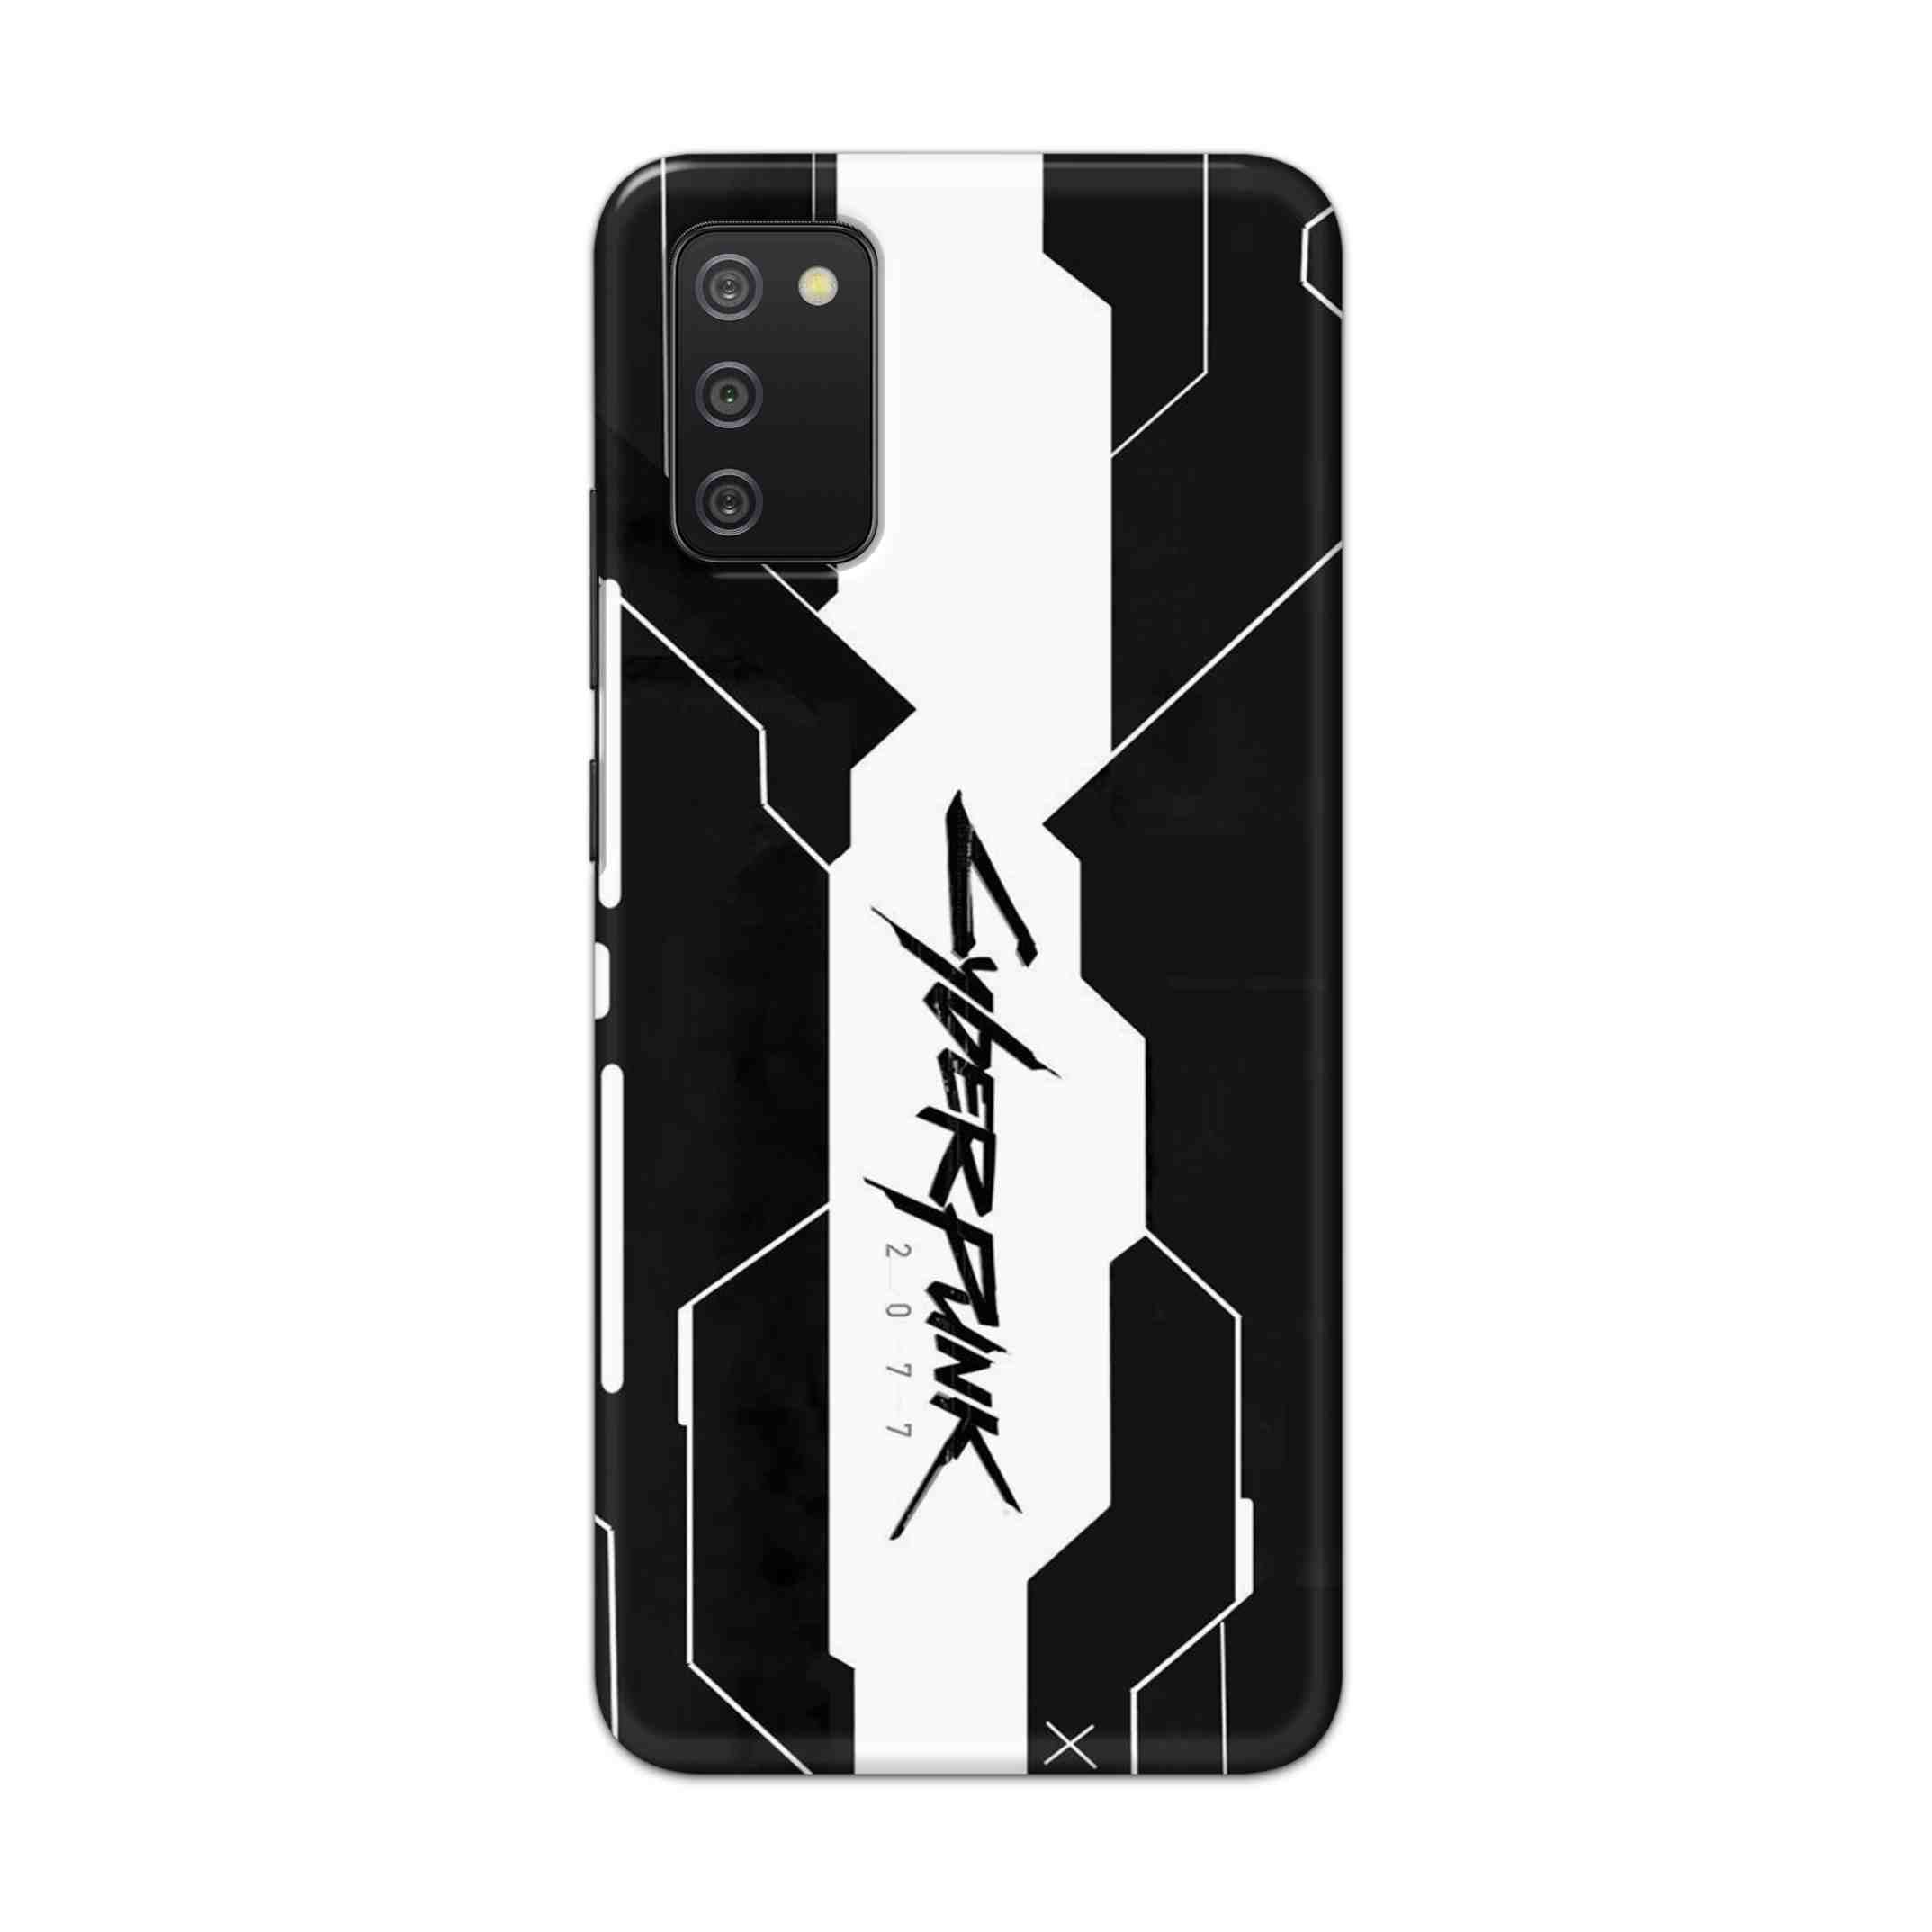 Buy Cyberpunk 2077 Art Hard Back Mobile Phone Case Cover For Samsung Galaxy M02s Online